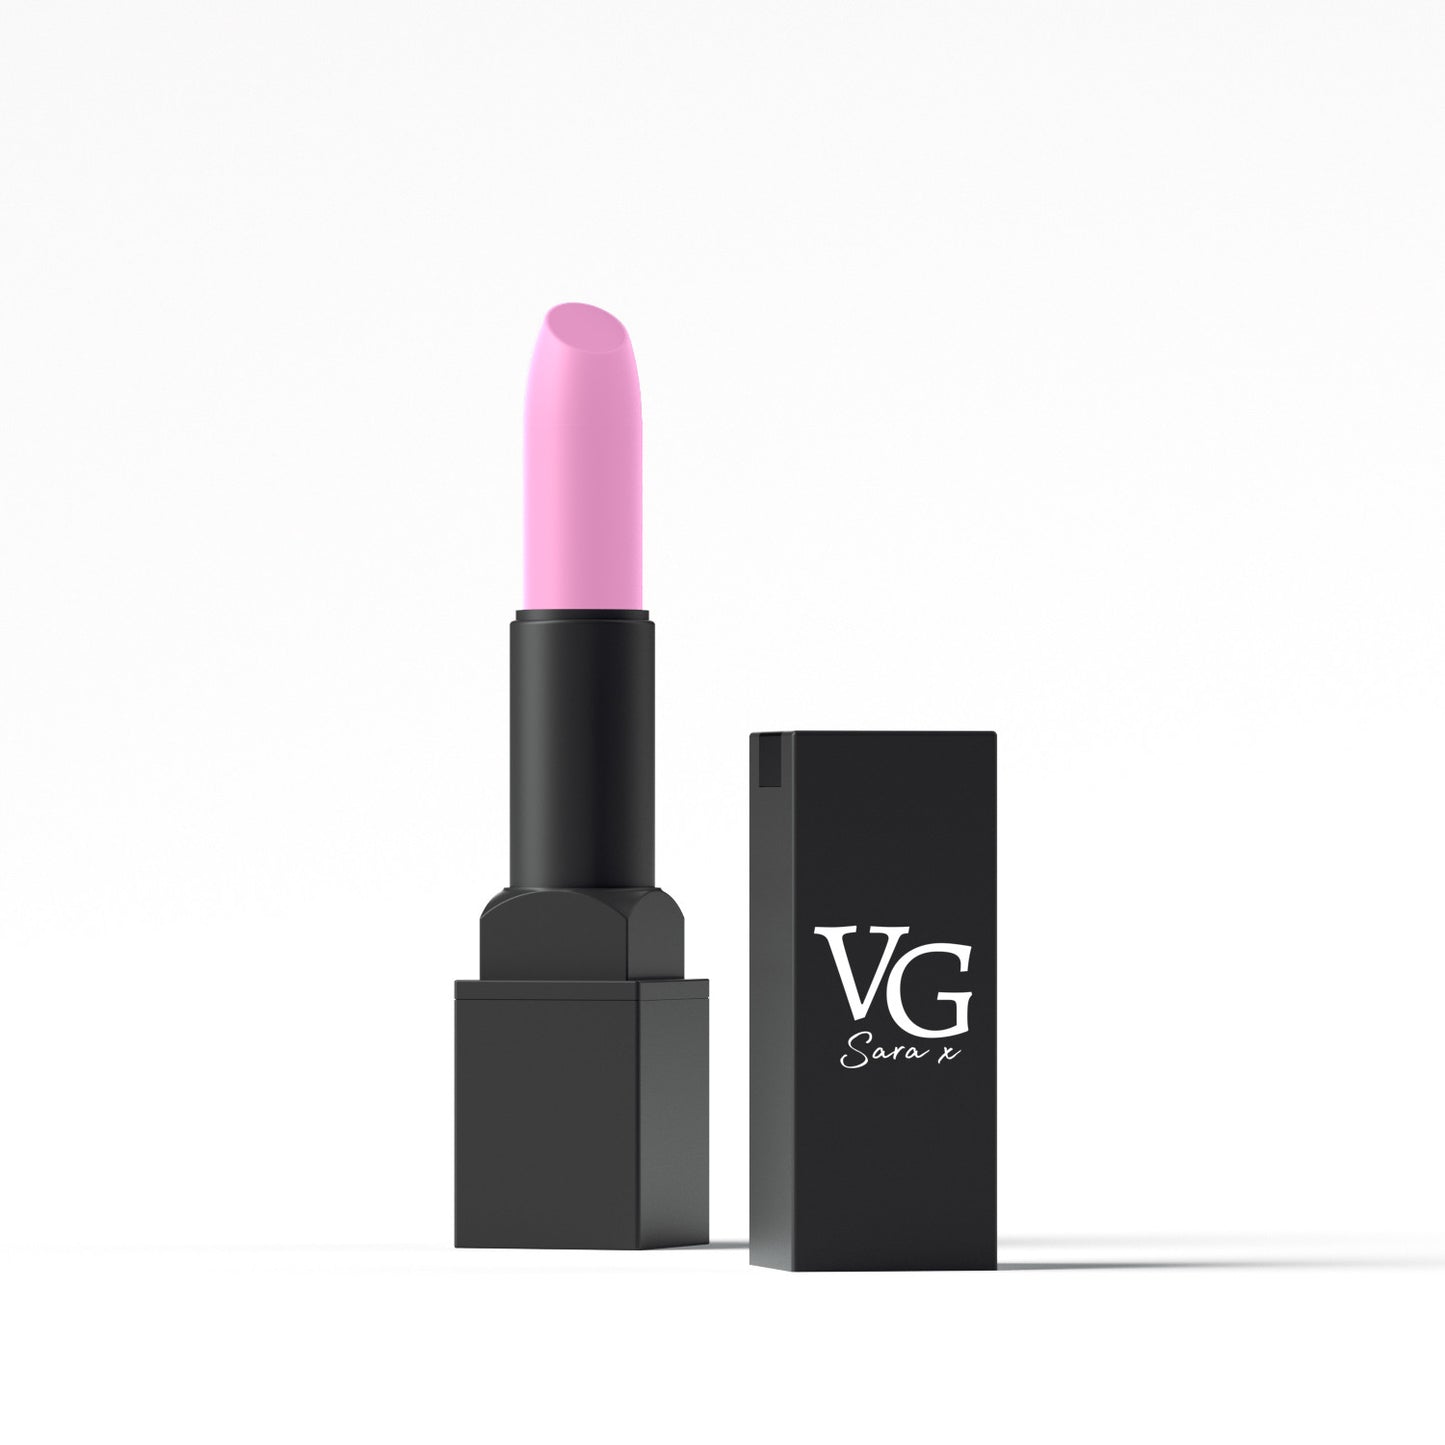 Close-up of Naturally Long-Lasting Lipstick with VG logo